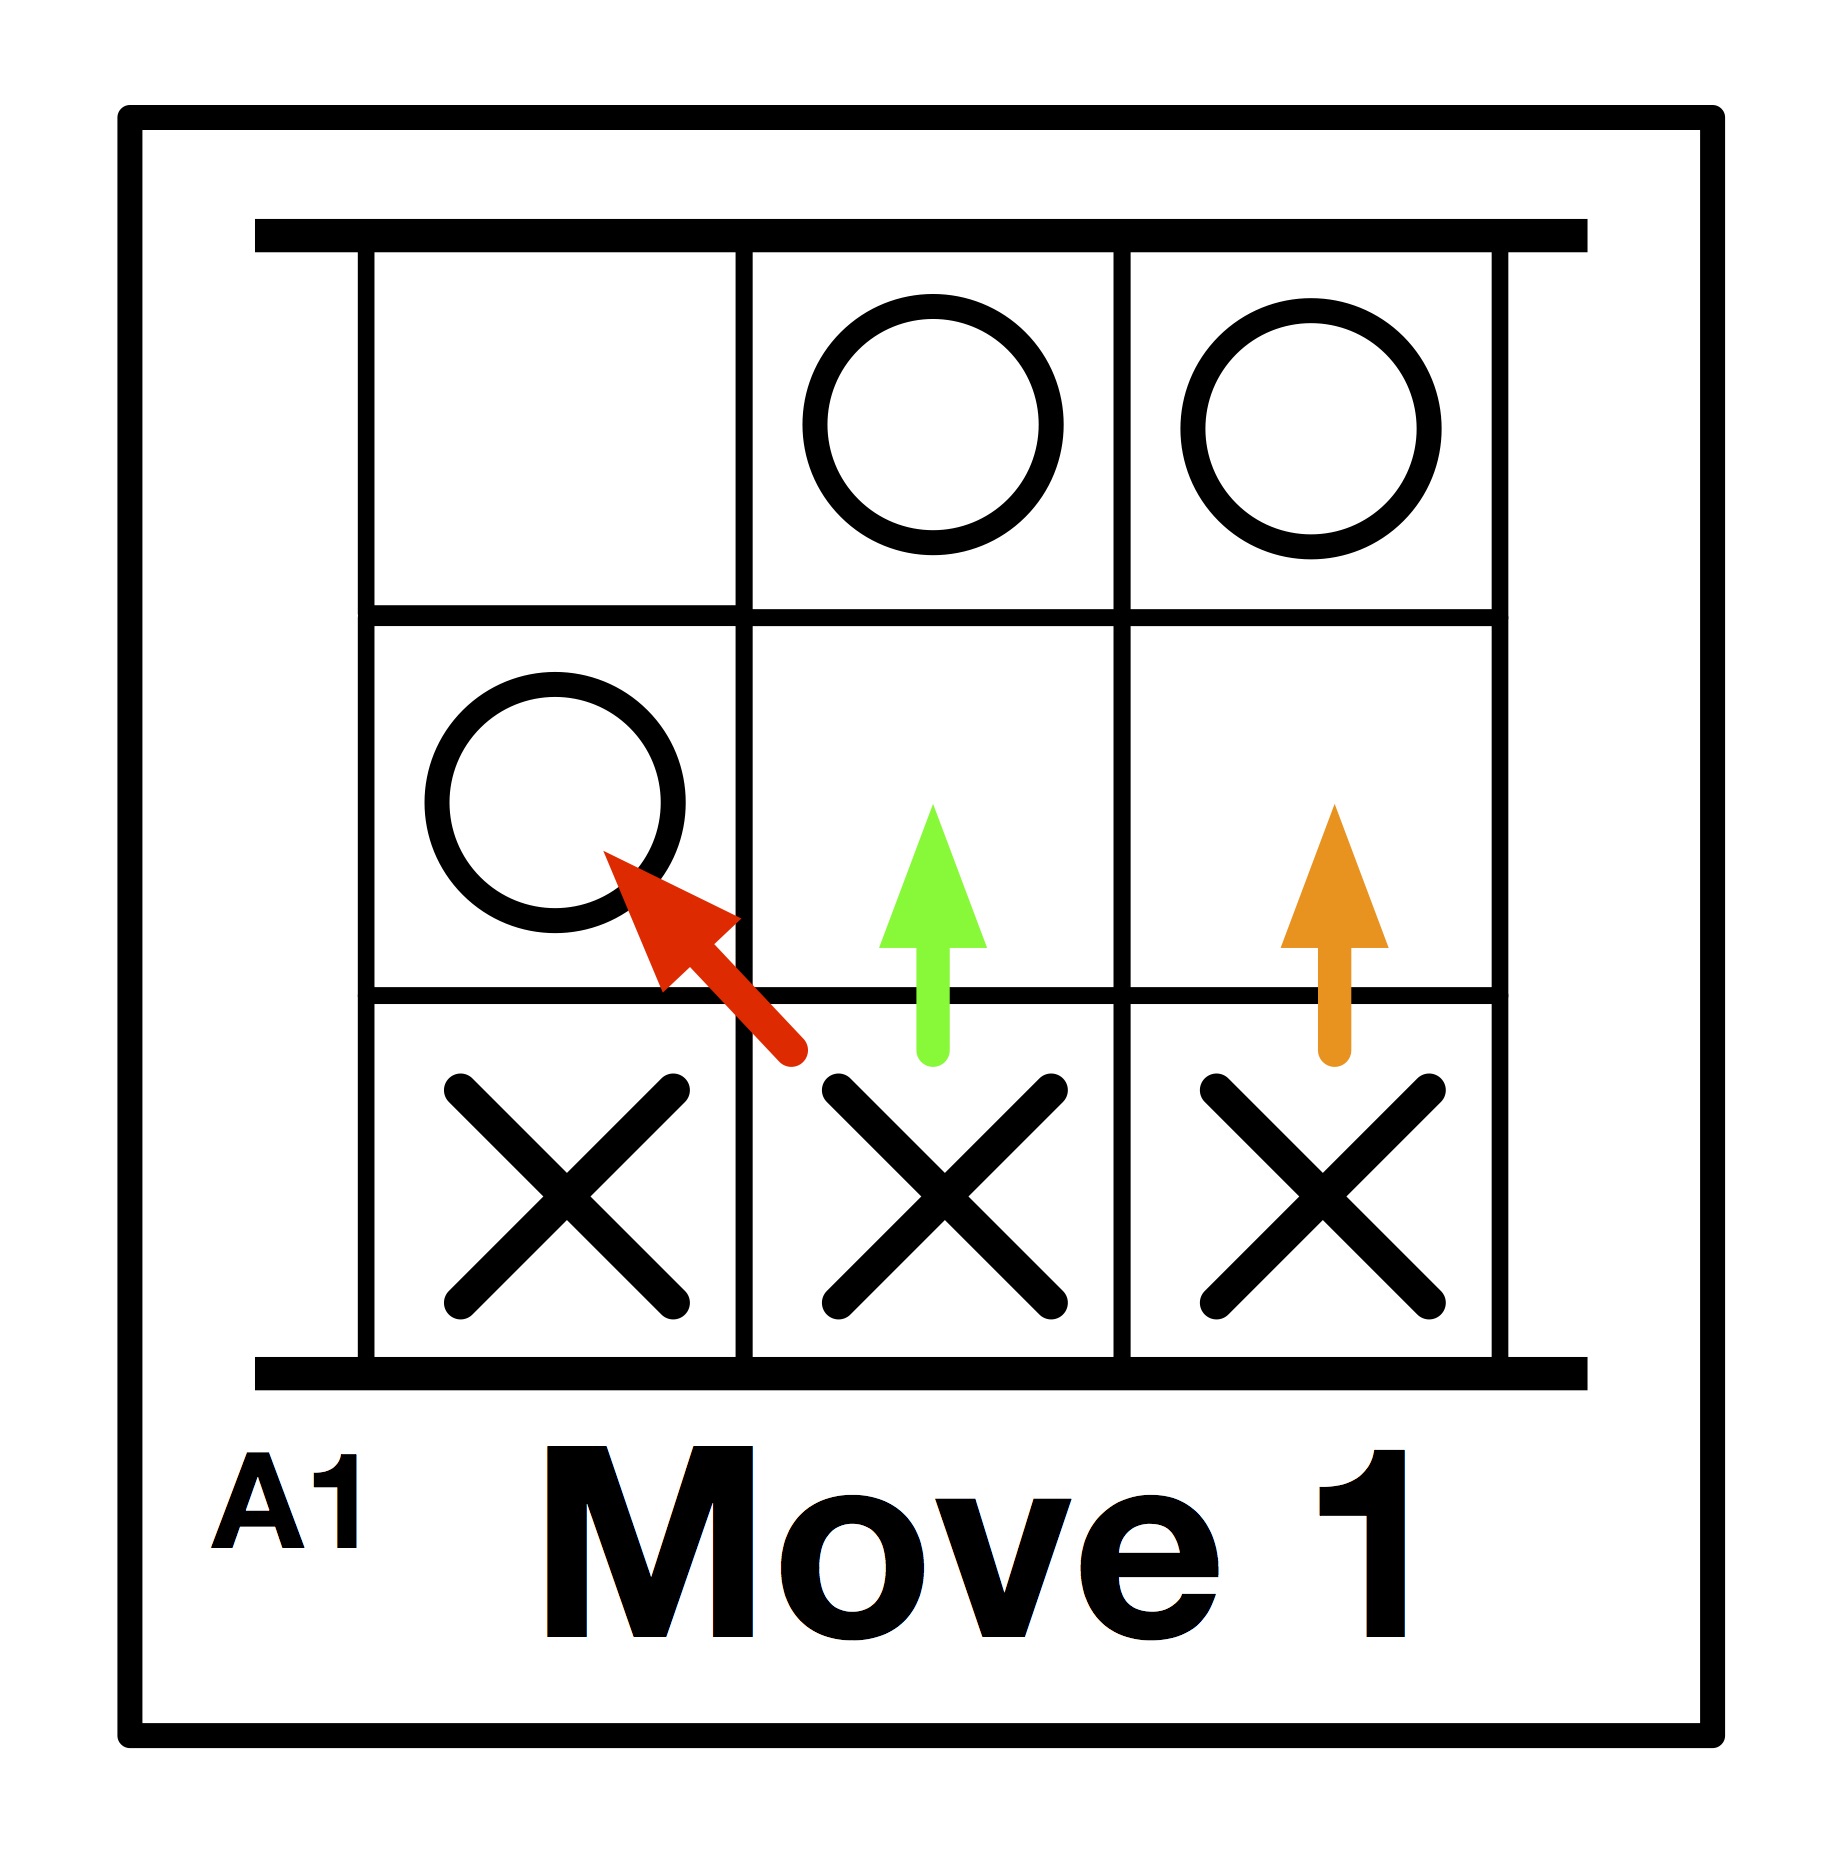 Position A1 and possible moves for X (going second)